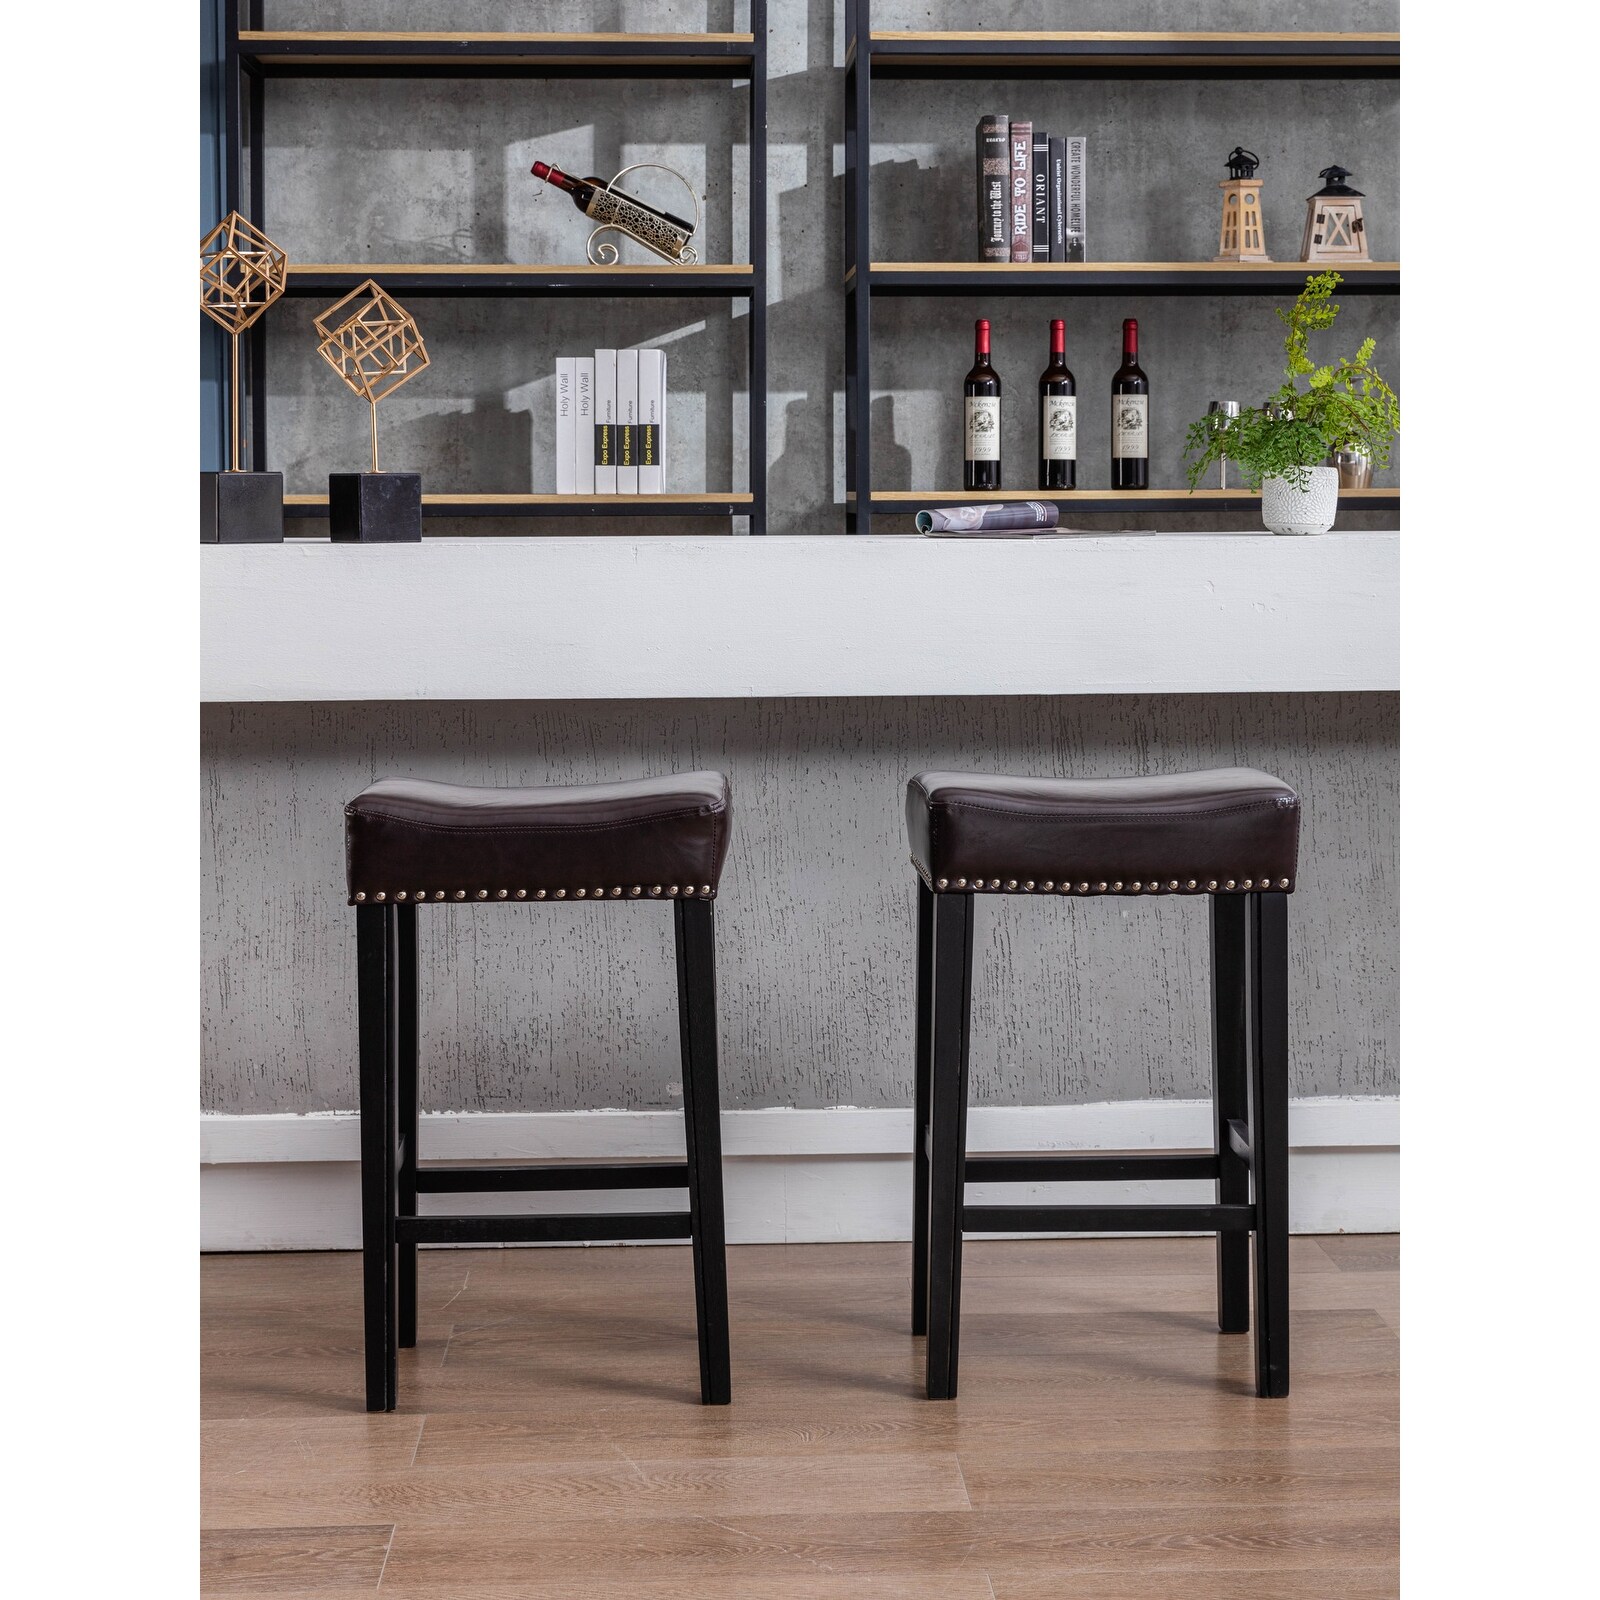 29" Bar Stools Backless Leather Saddle Barstools with Solid Wood Legs (Set of 2)